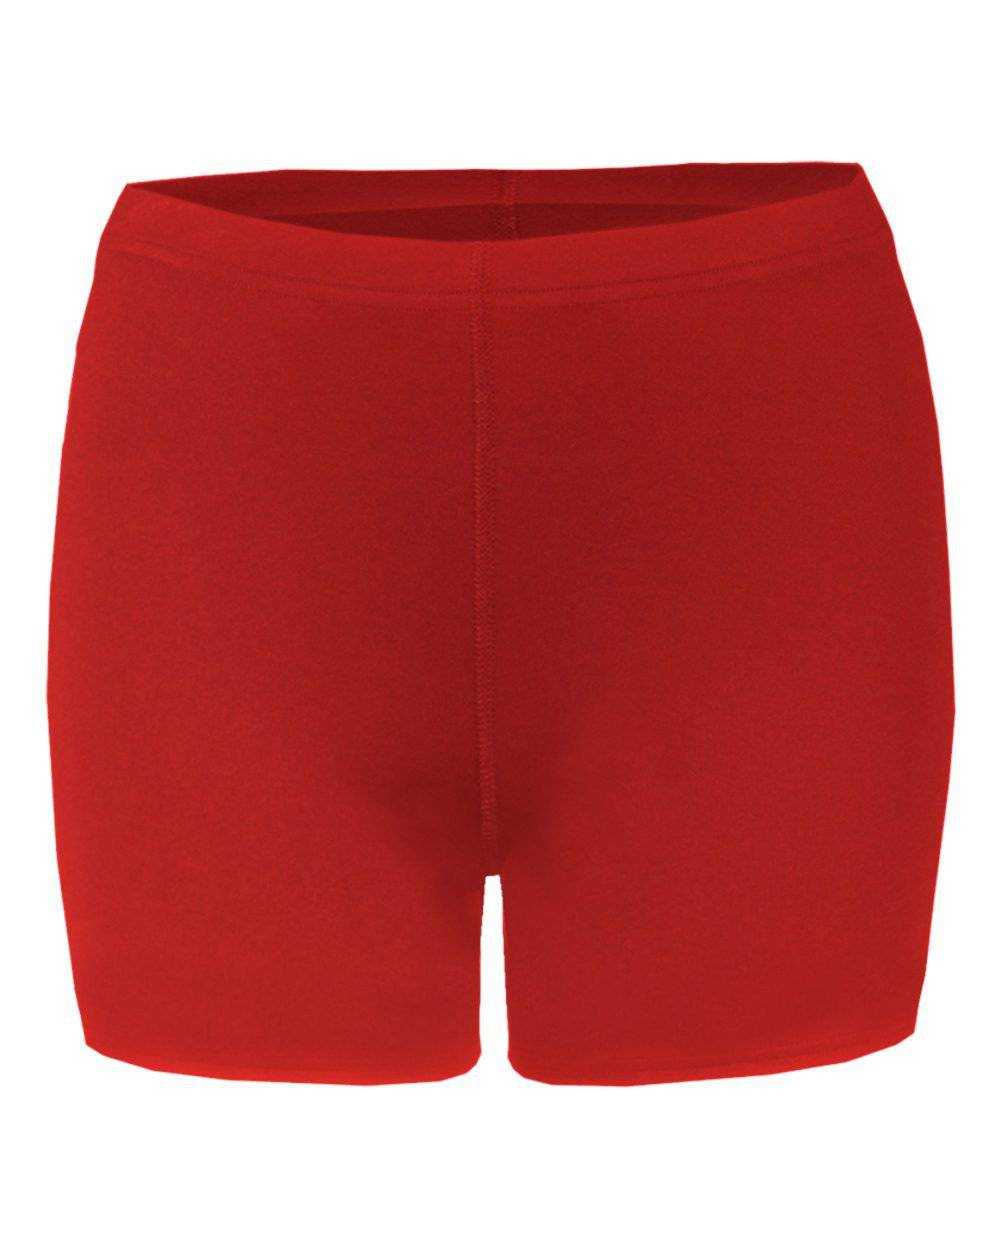 Badger Sport 4614 B-Fit Compression Ladies Short 4" - Red - HIT a Double - 1